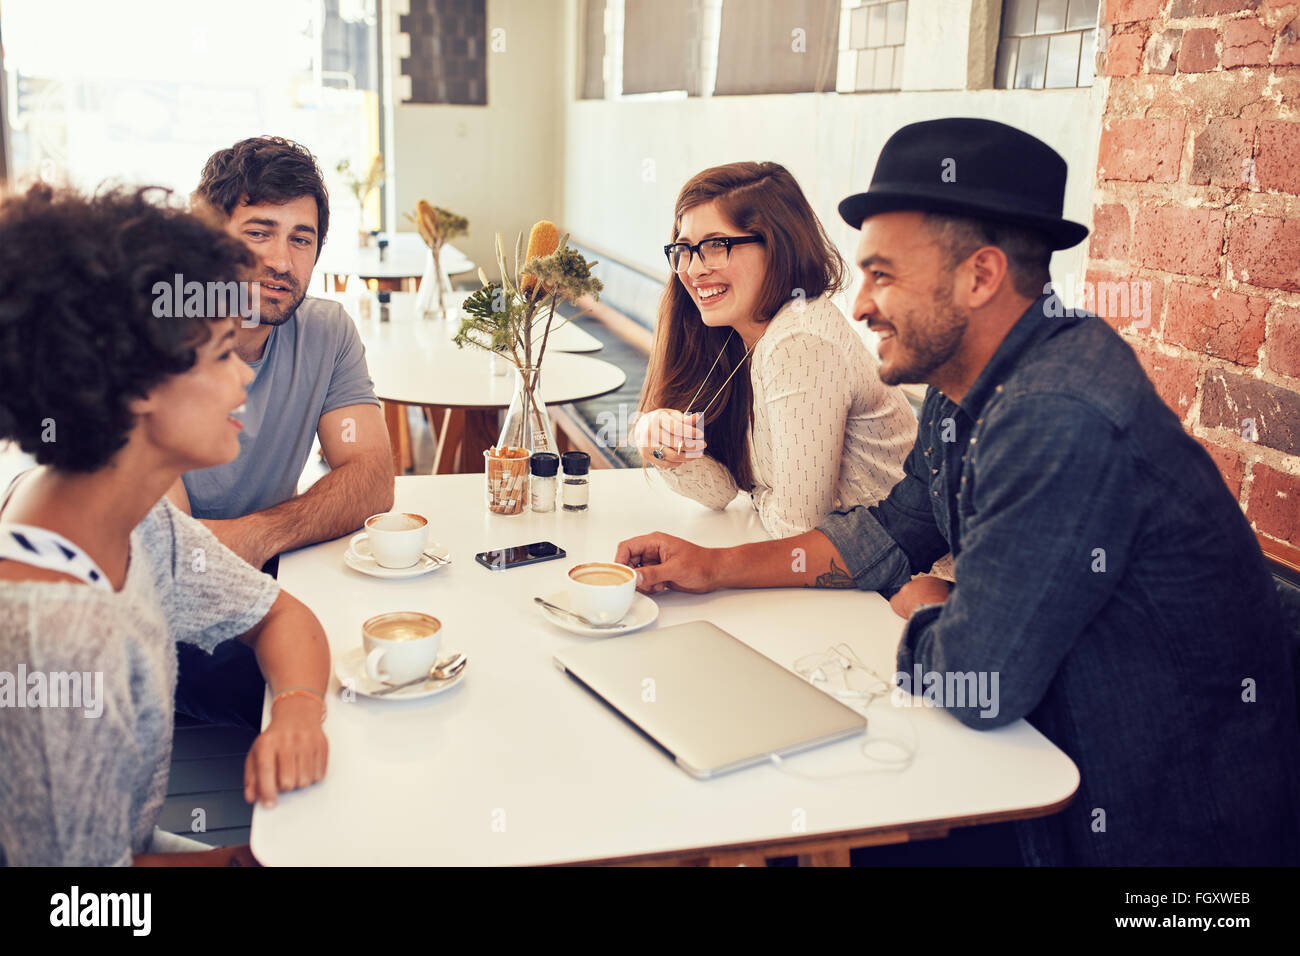 Group of young friends hanging out at a cafe. Young men and women sitting together and talking in a coffee shop. Stock Photo